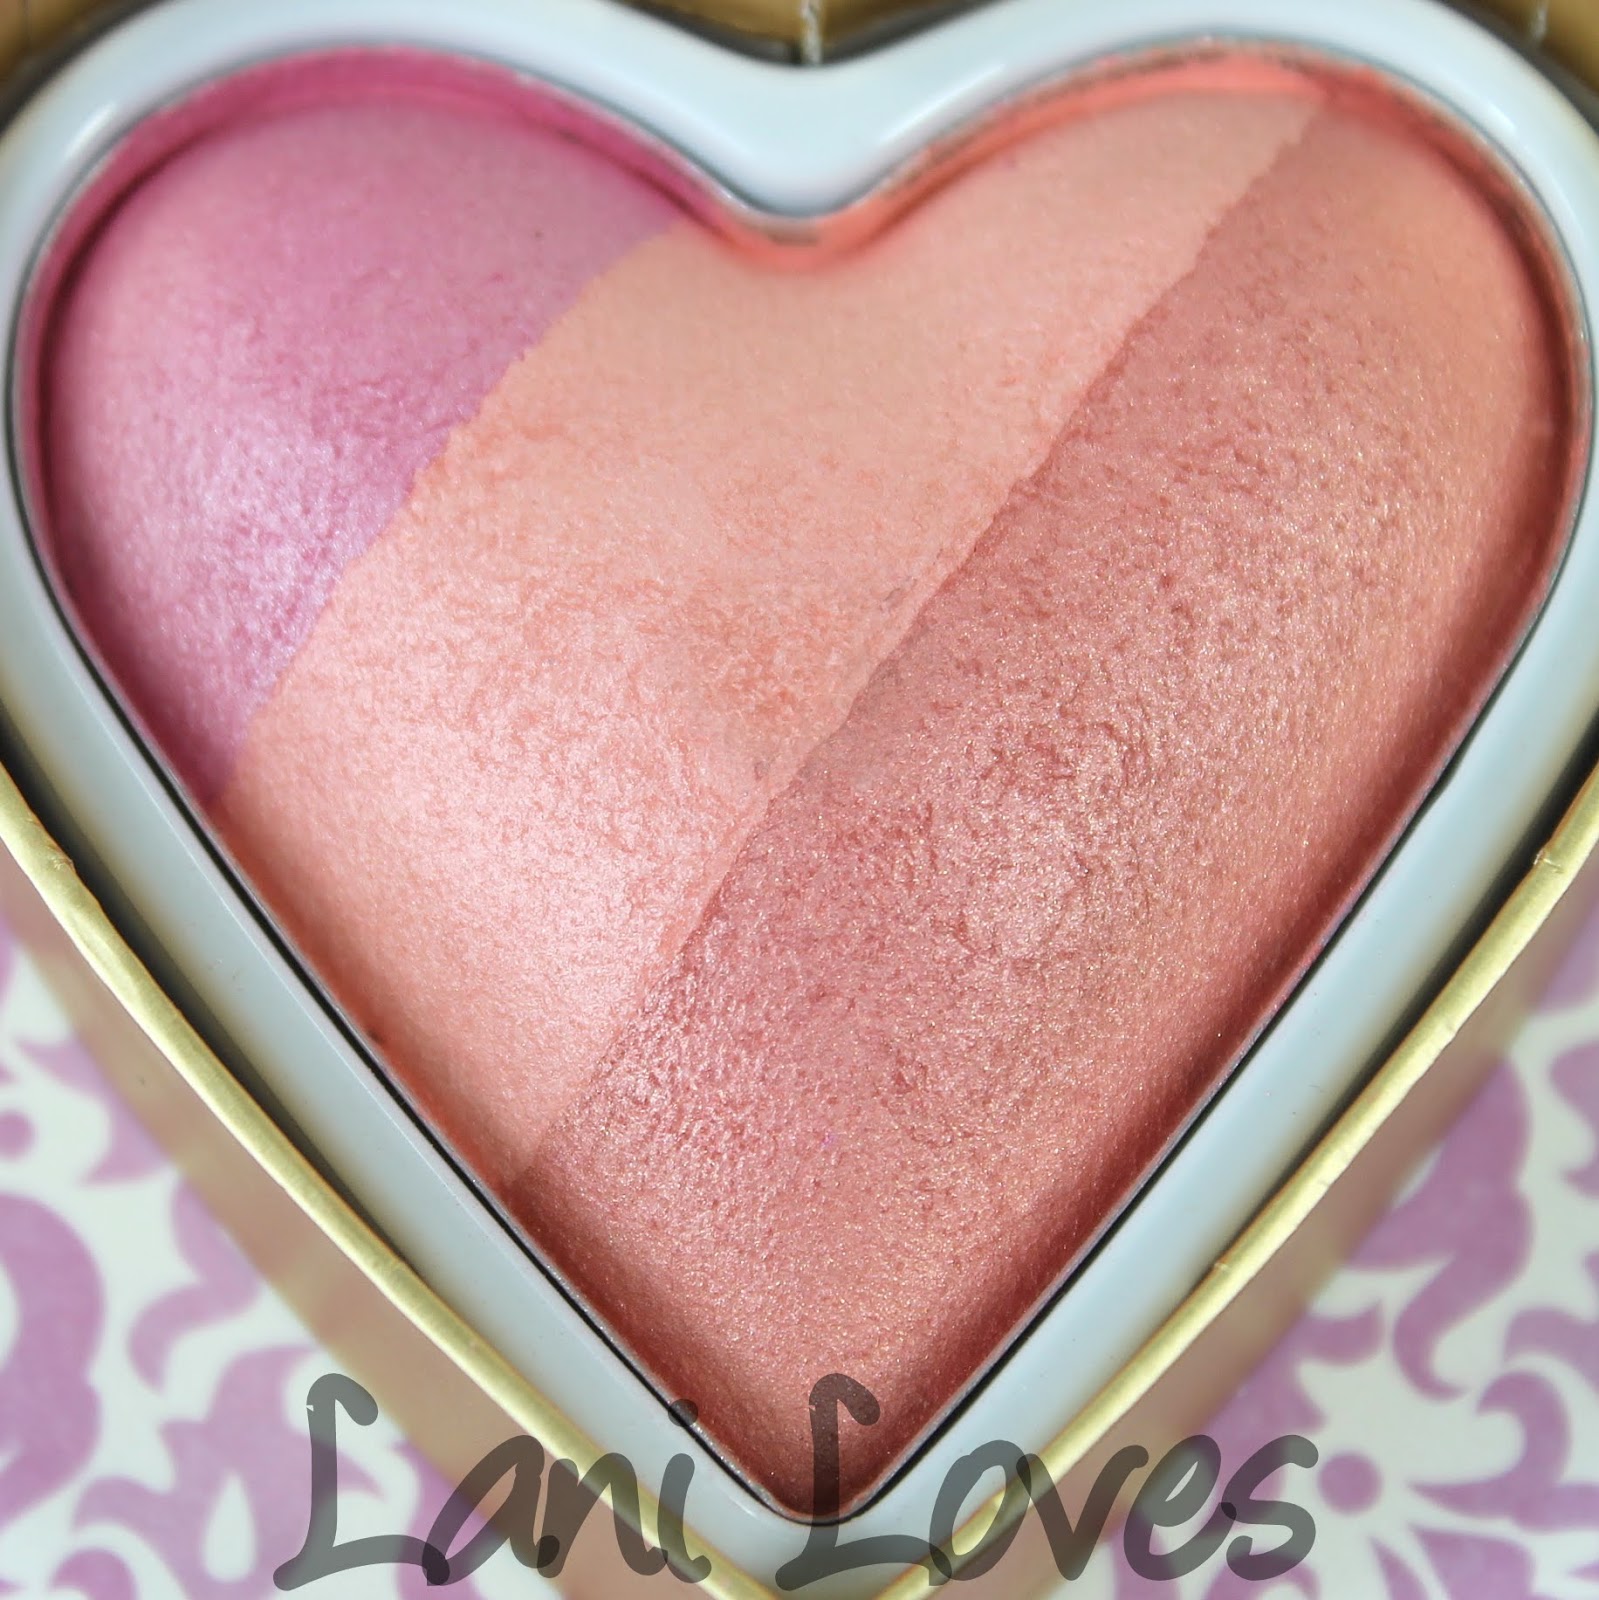 Makeup Revolution: I ♡ Makeup Blushing Hearts - Candy Queen of Hearts Triple Baked Blushers Swatches & Review